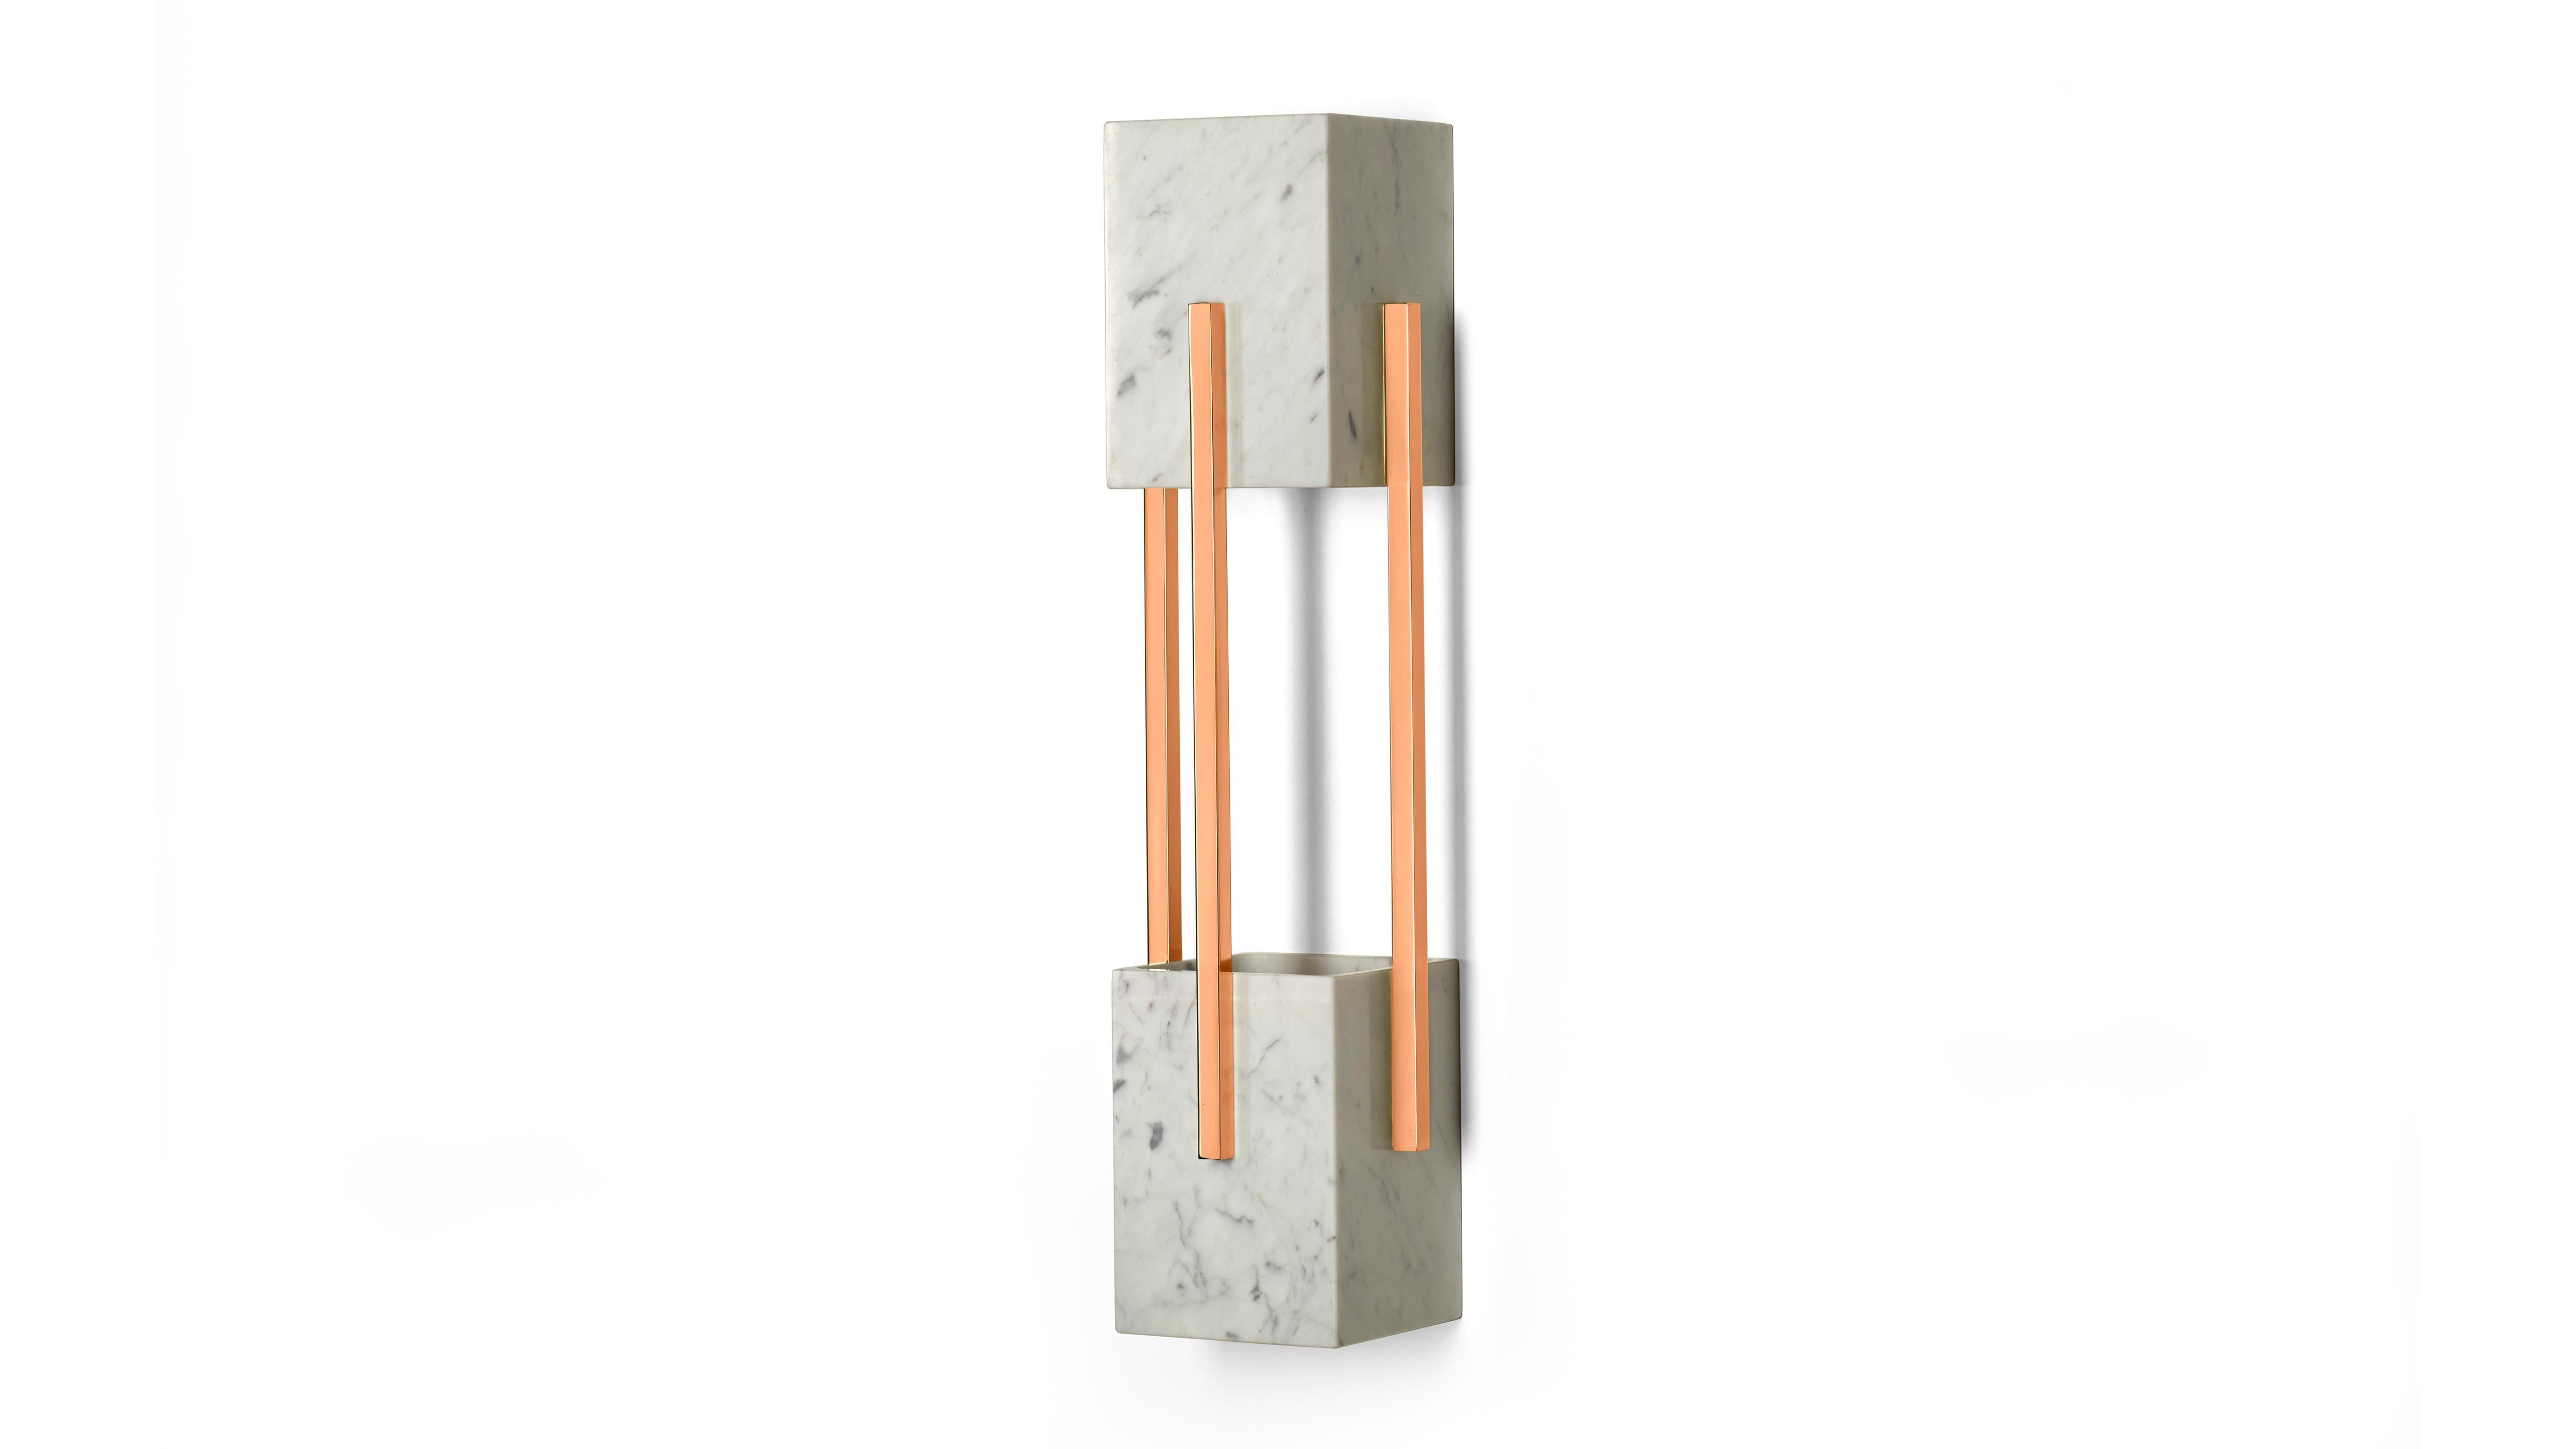 Looshaus Carrara Marble and Copper Wall Lamp by InsidherLand
Dimensions: D 13 x W 14 x H 56 cm.
Materials: Carrara marble, polished copper.
3.5 kg.
Available in other marbles and metals.

The Looshaus building by Architect Adolf Loos in Vienna